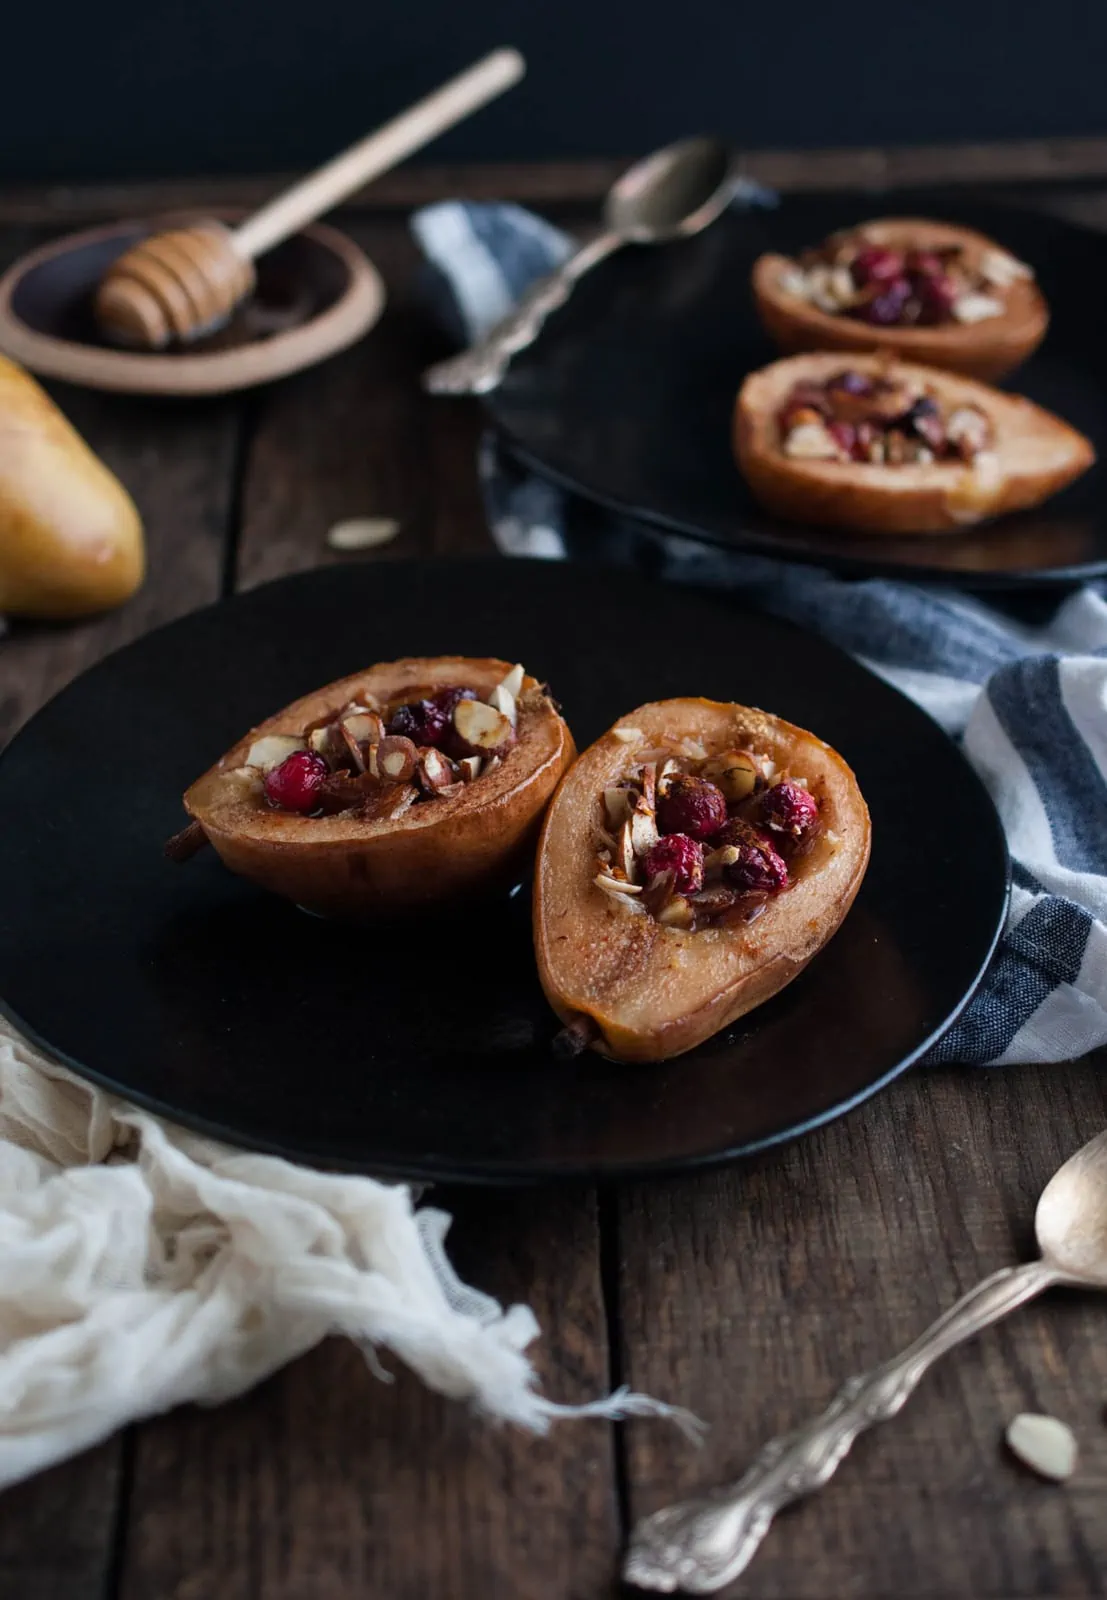 These baked pears with honey and almonds are the perfect healthy dessert for the holidays with cranberries and a nutty crunch all for 200 calories! 